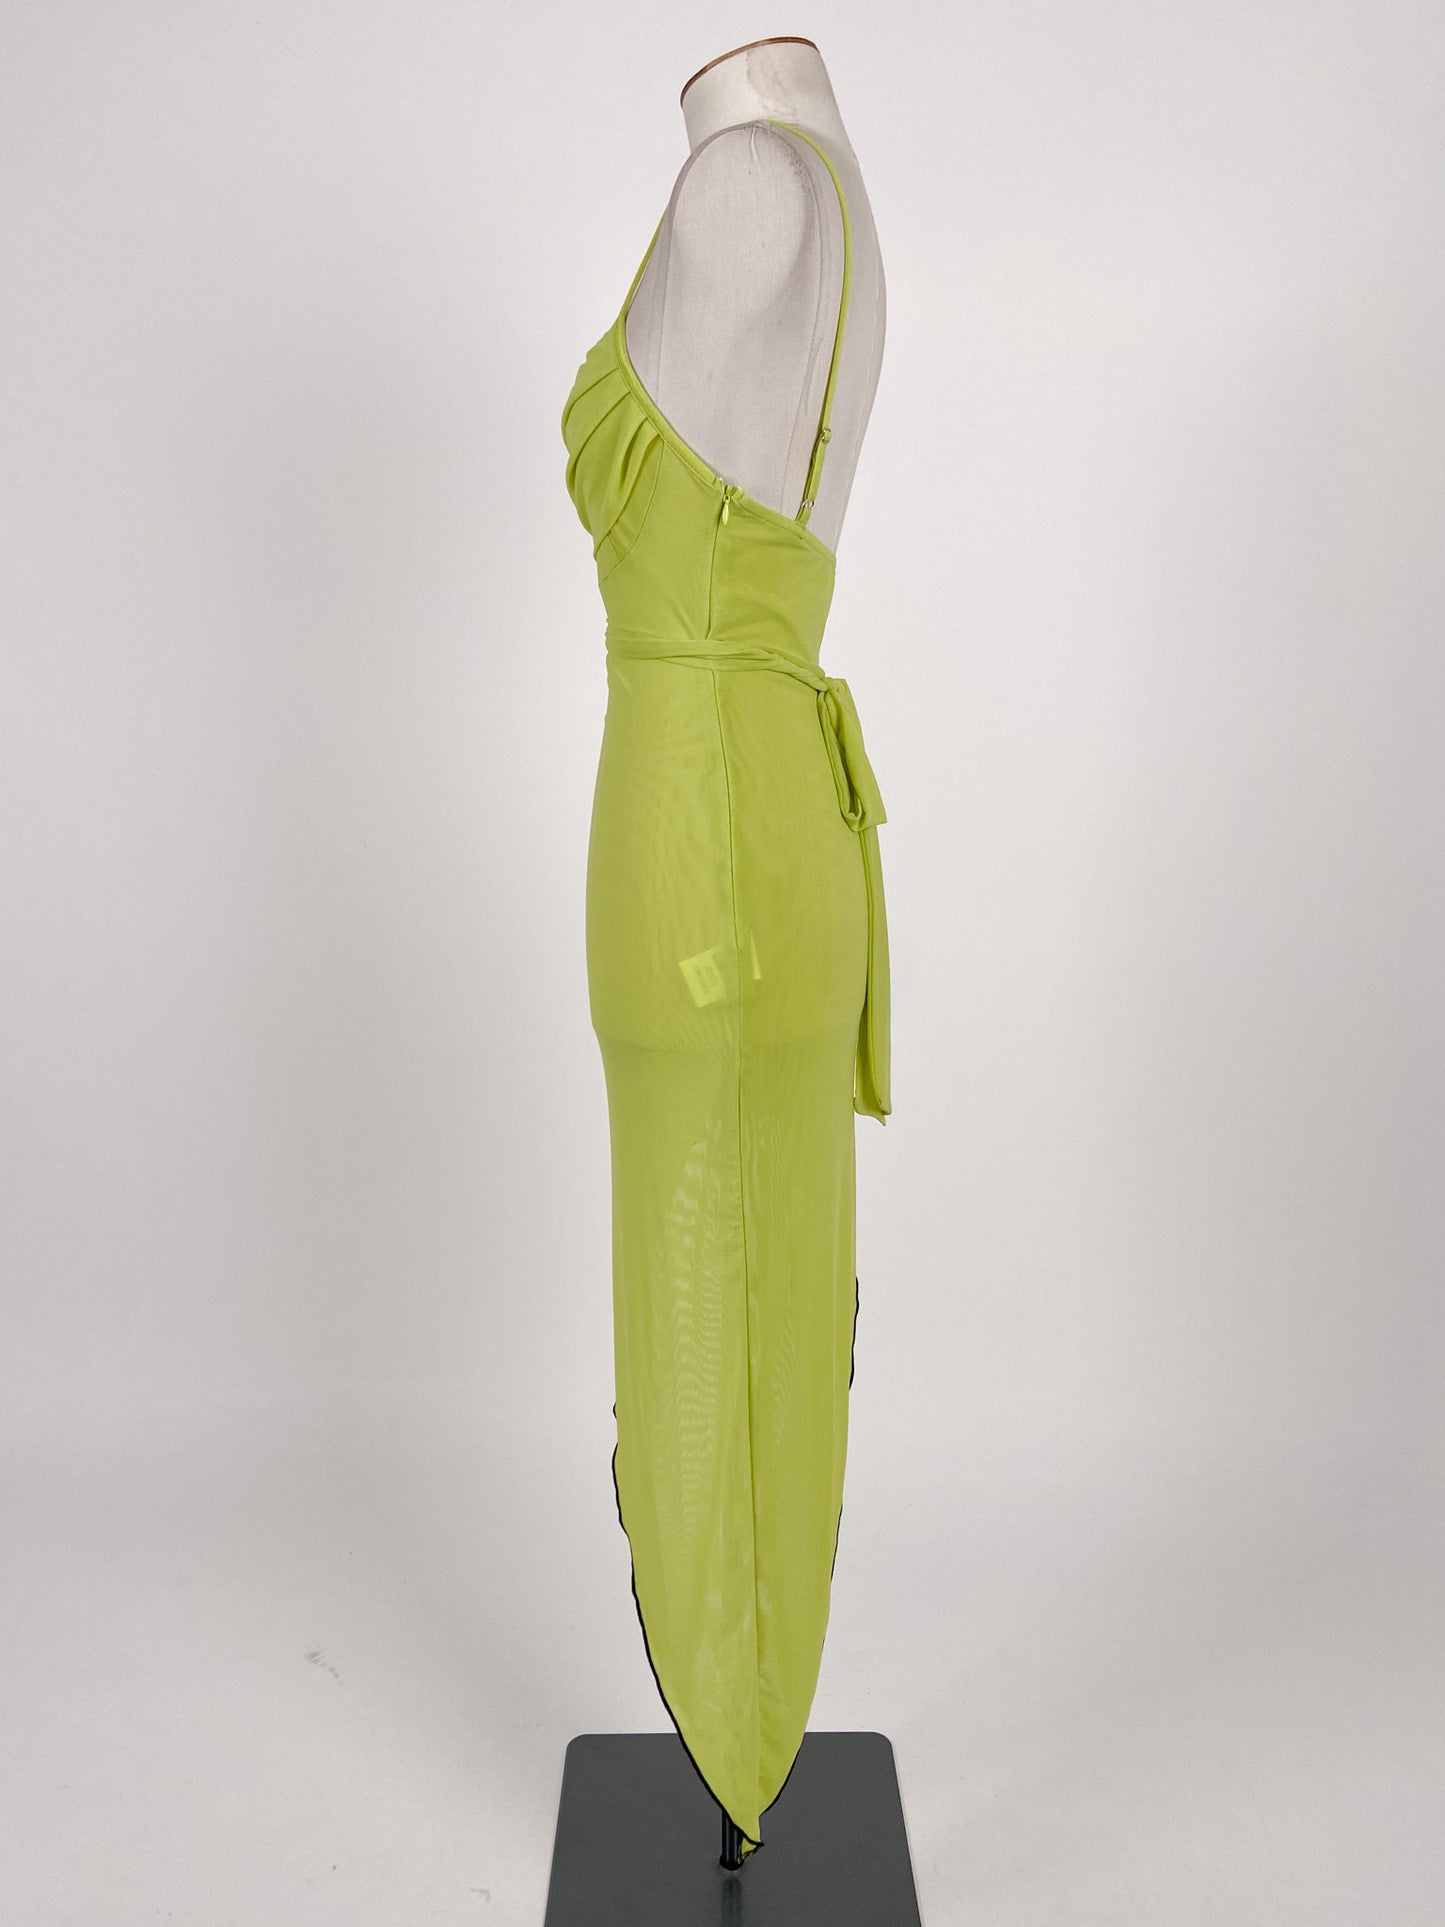 PepperMayo | Green Casual/Cocktail Dress | Size XS